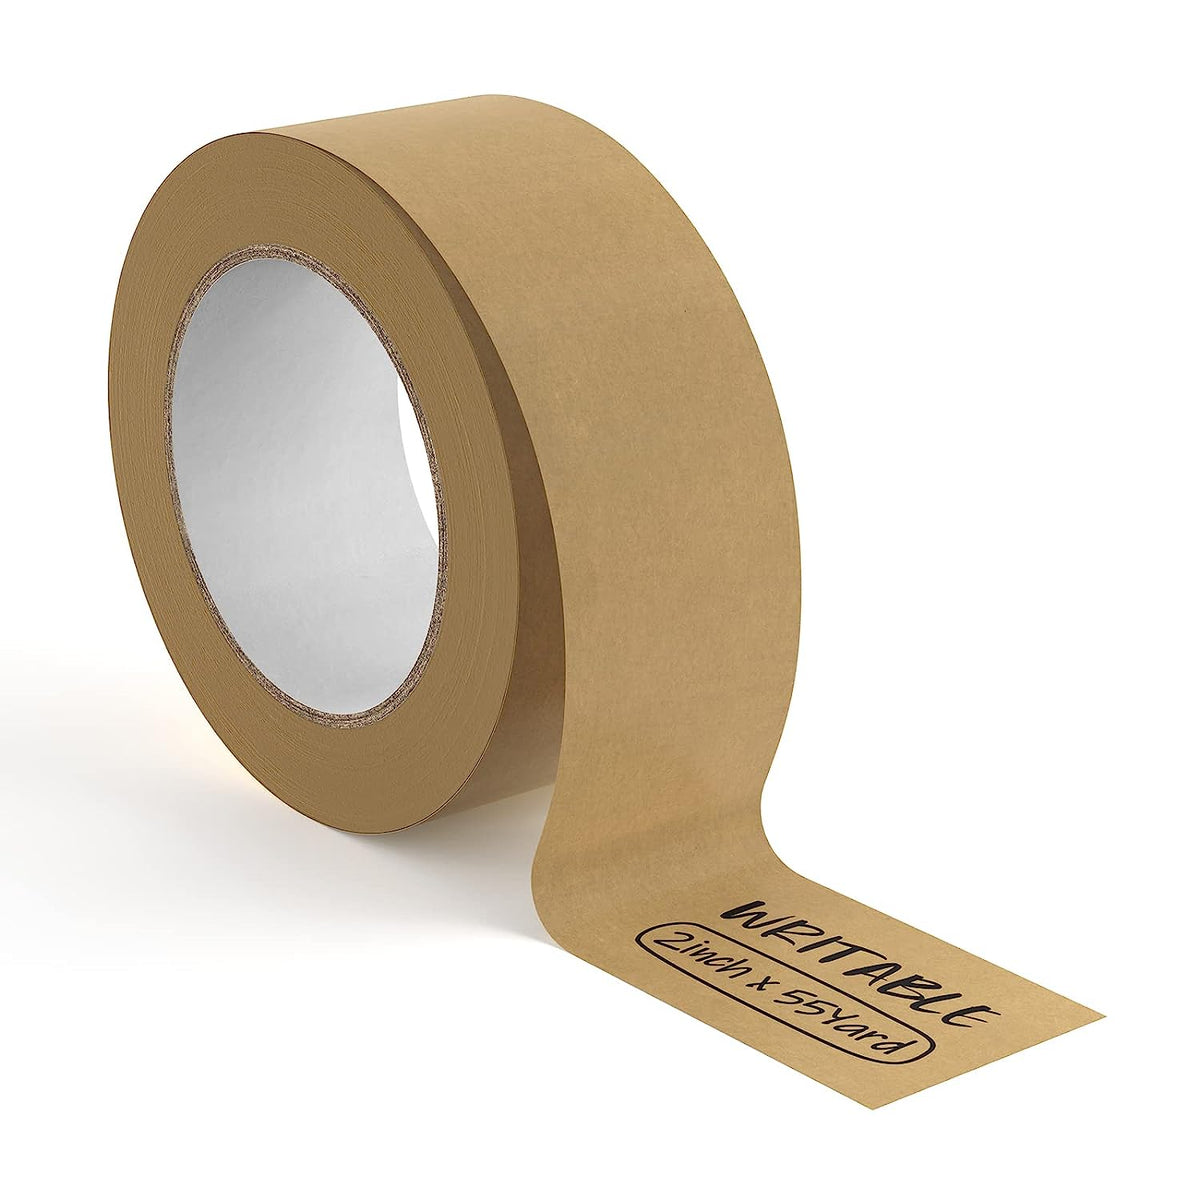 MUNBYN writable brown shipping tape is 2 inches x 55 yards.